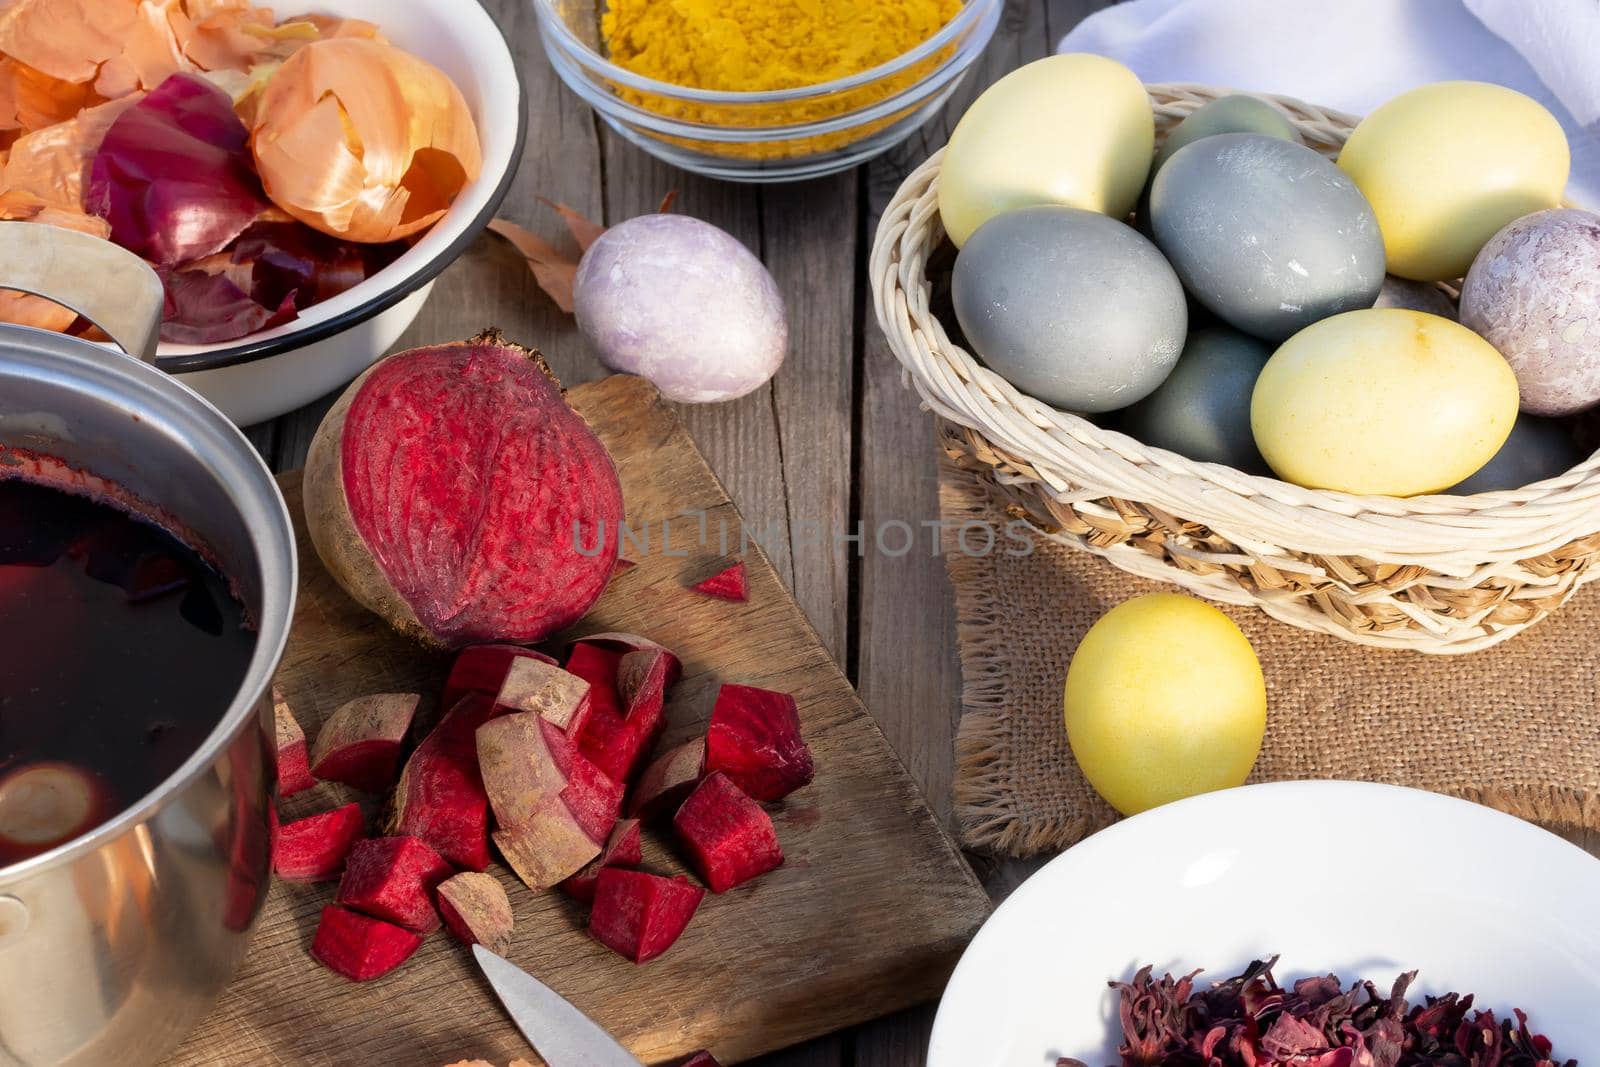 Process of coloring Easter eggs with various food natural dyes. Preparing for Easter